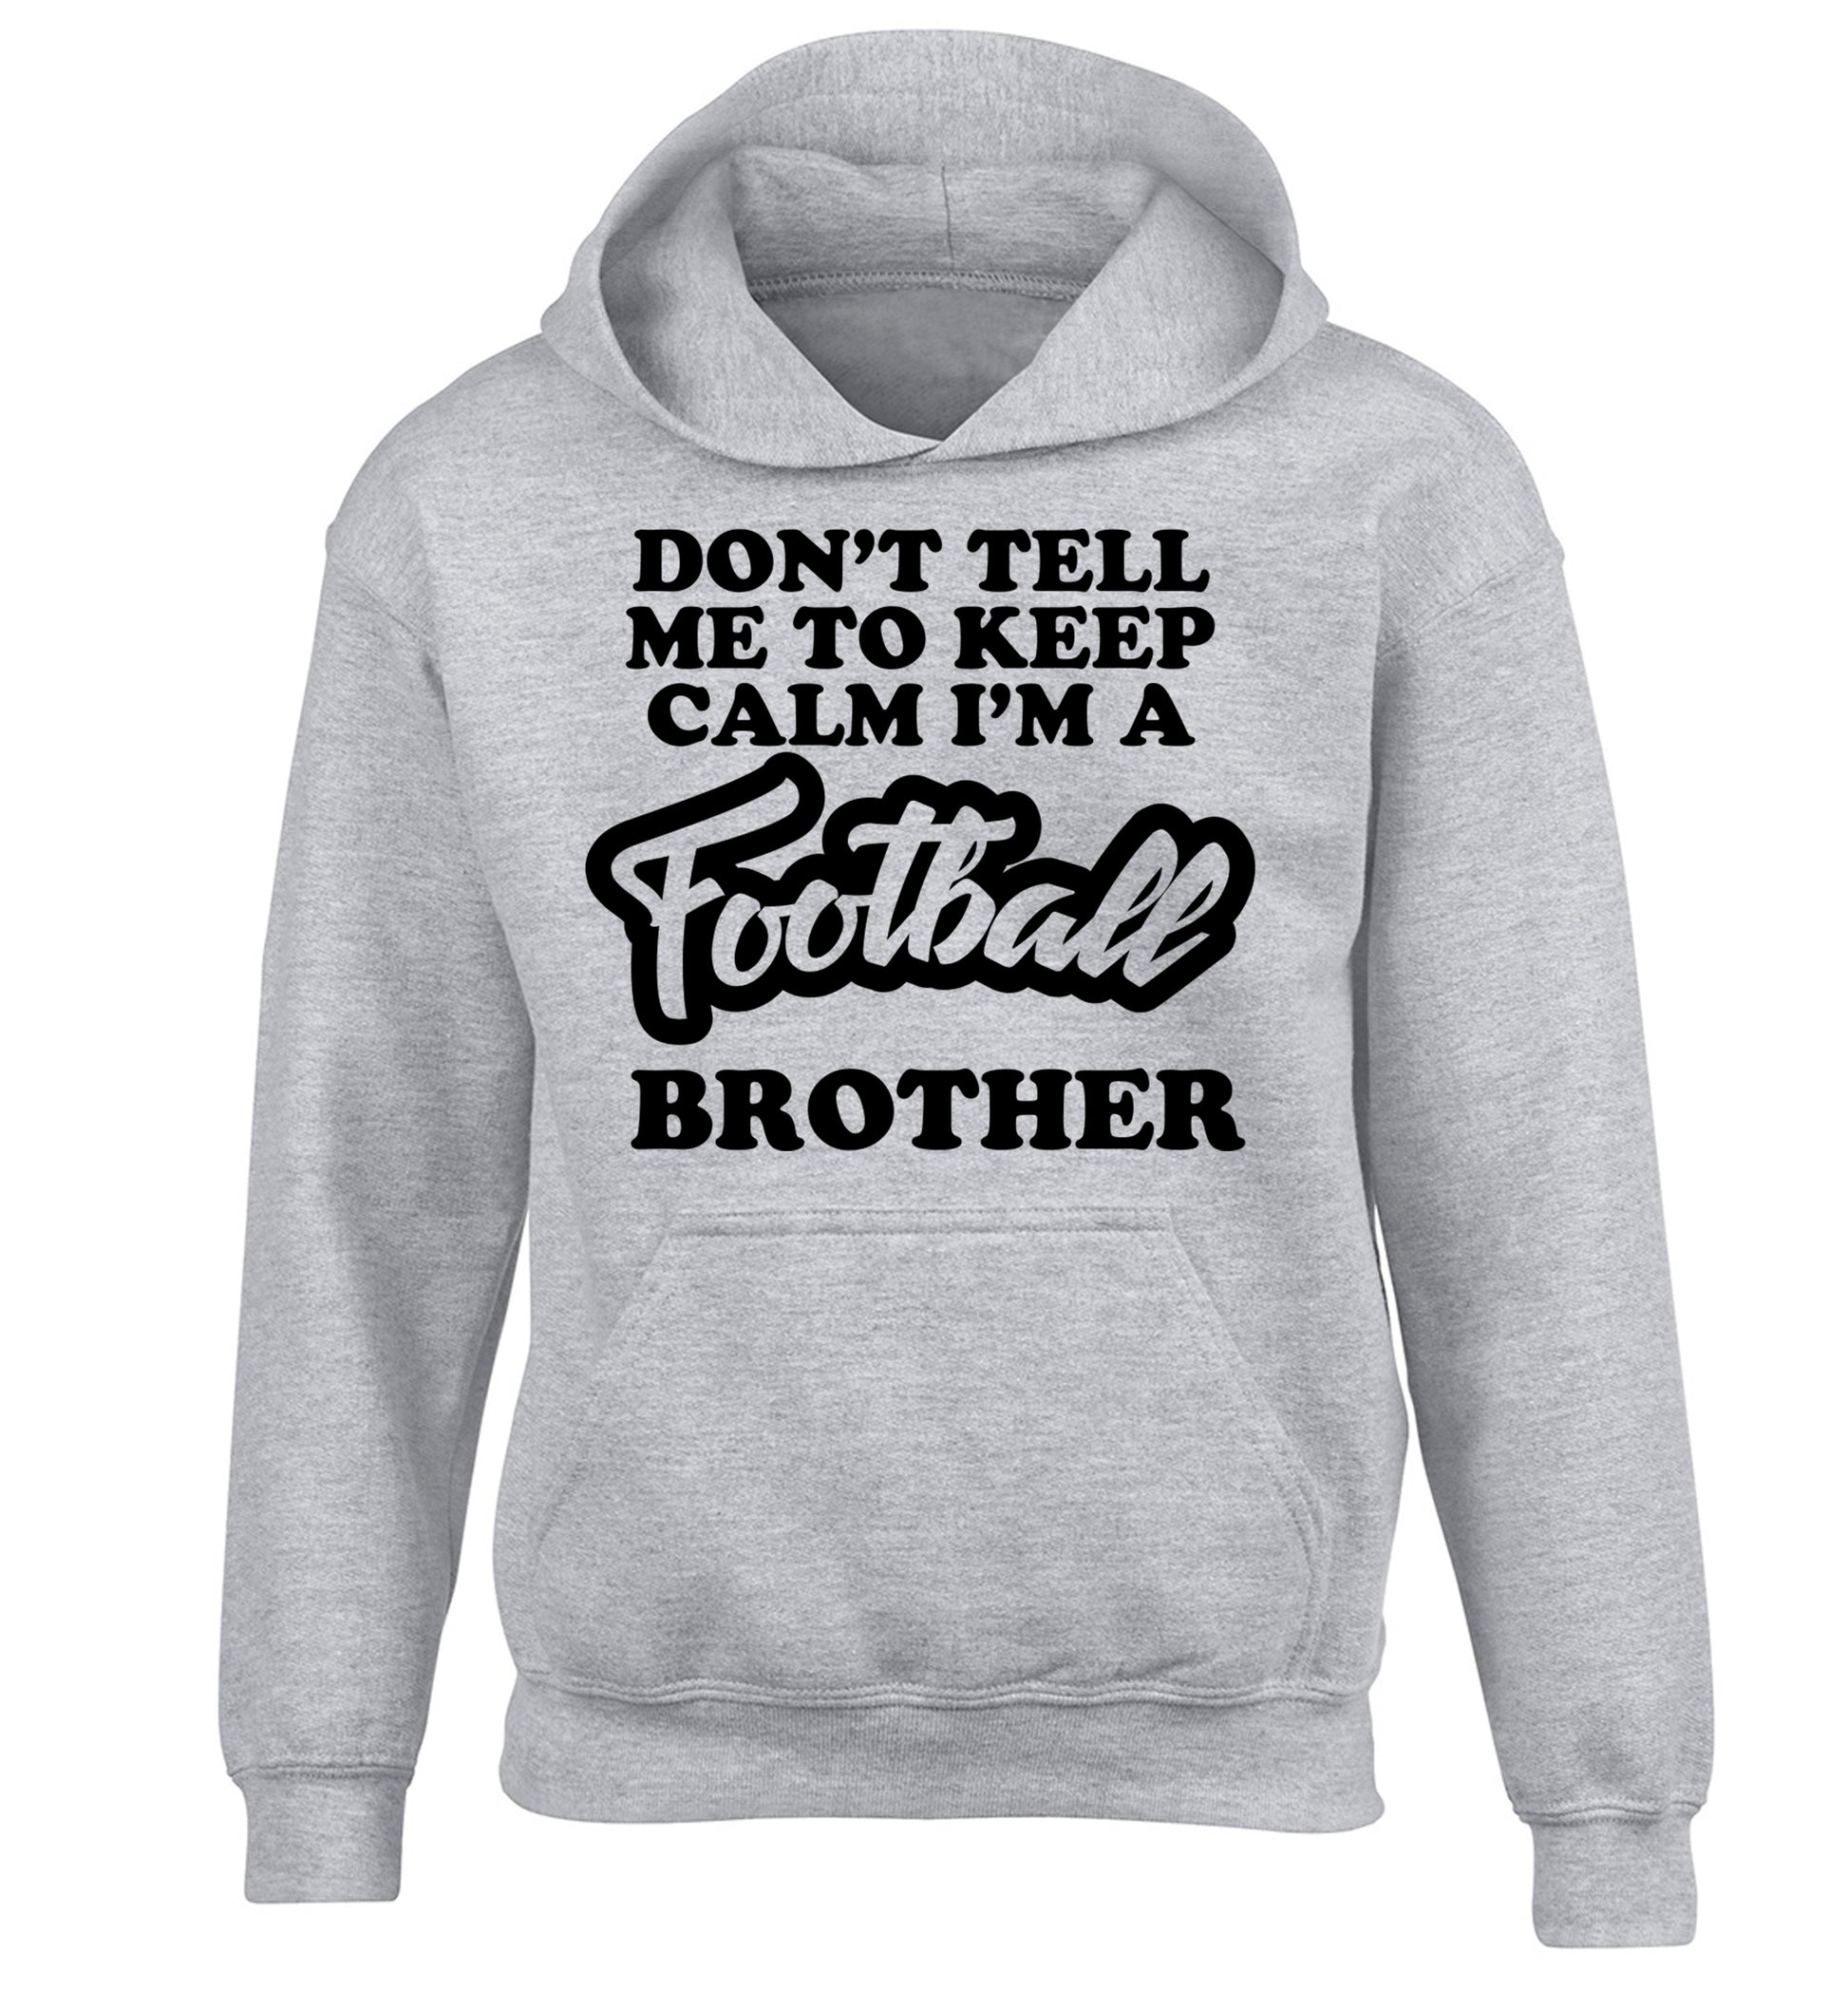 Don't tell me to keep calm I'm a football brother children's grey hoodie 12-14 Years